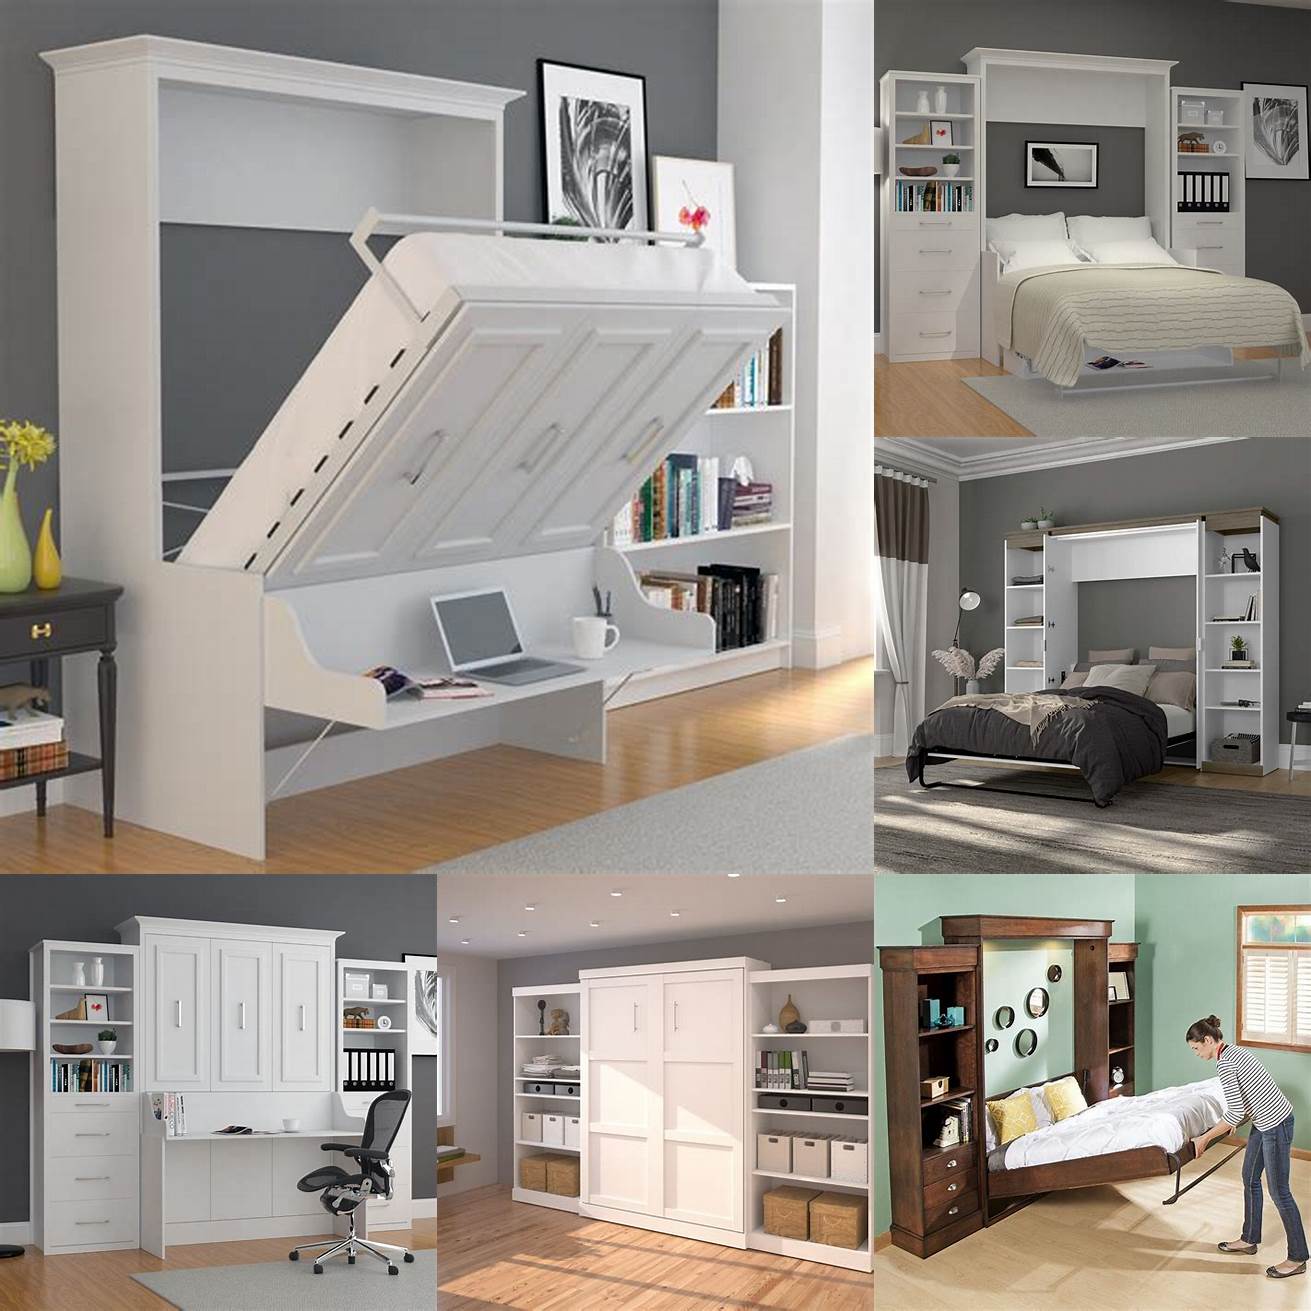 A white Queen Size Murphy Bed with built-in shelves and cabinets